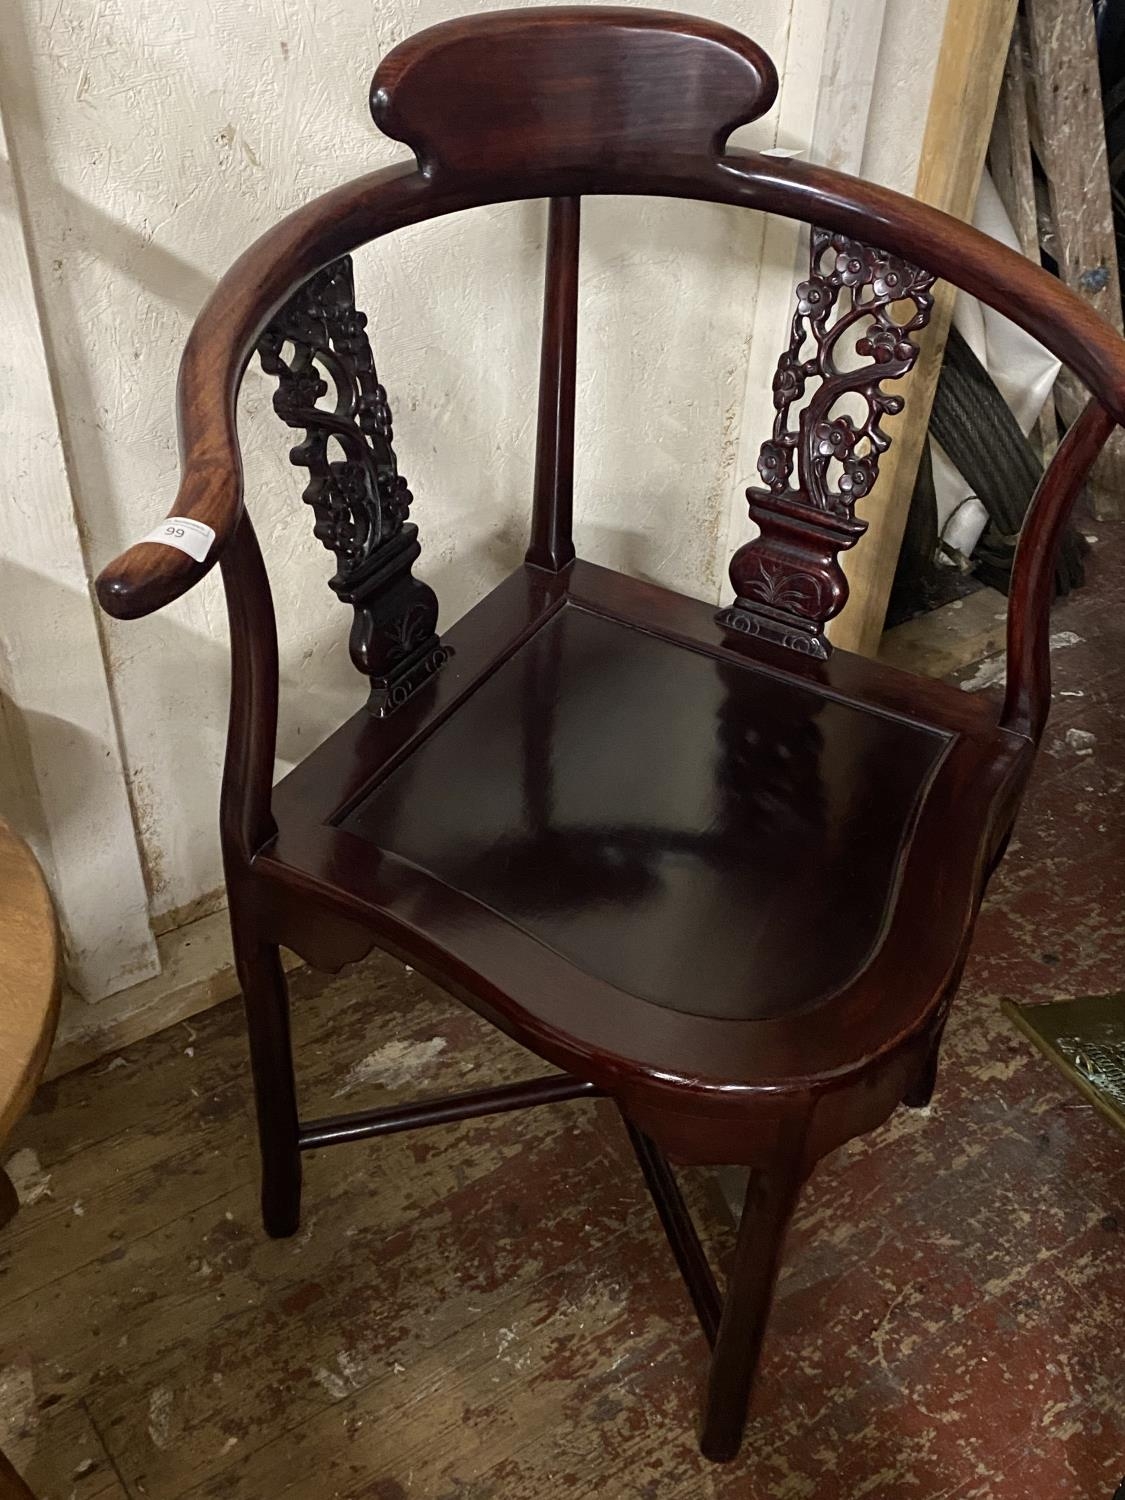 A good quality mahogany corner chair with hand carved decoration. No shipping